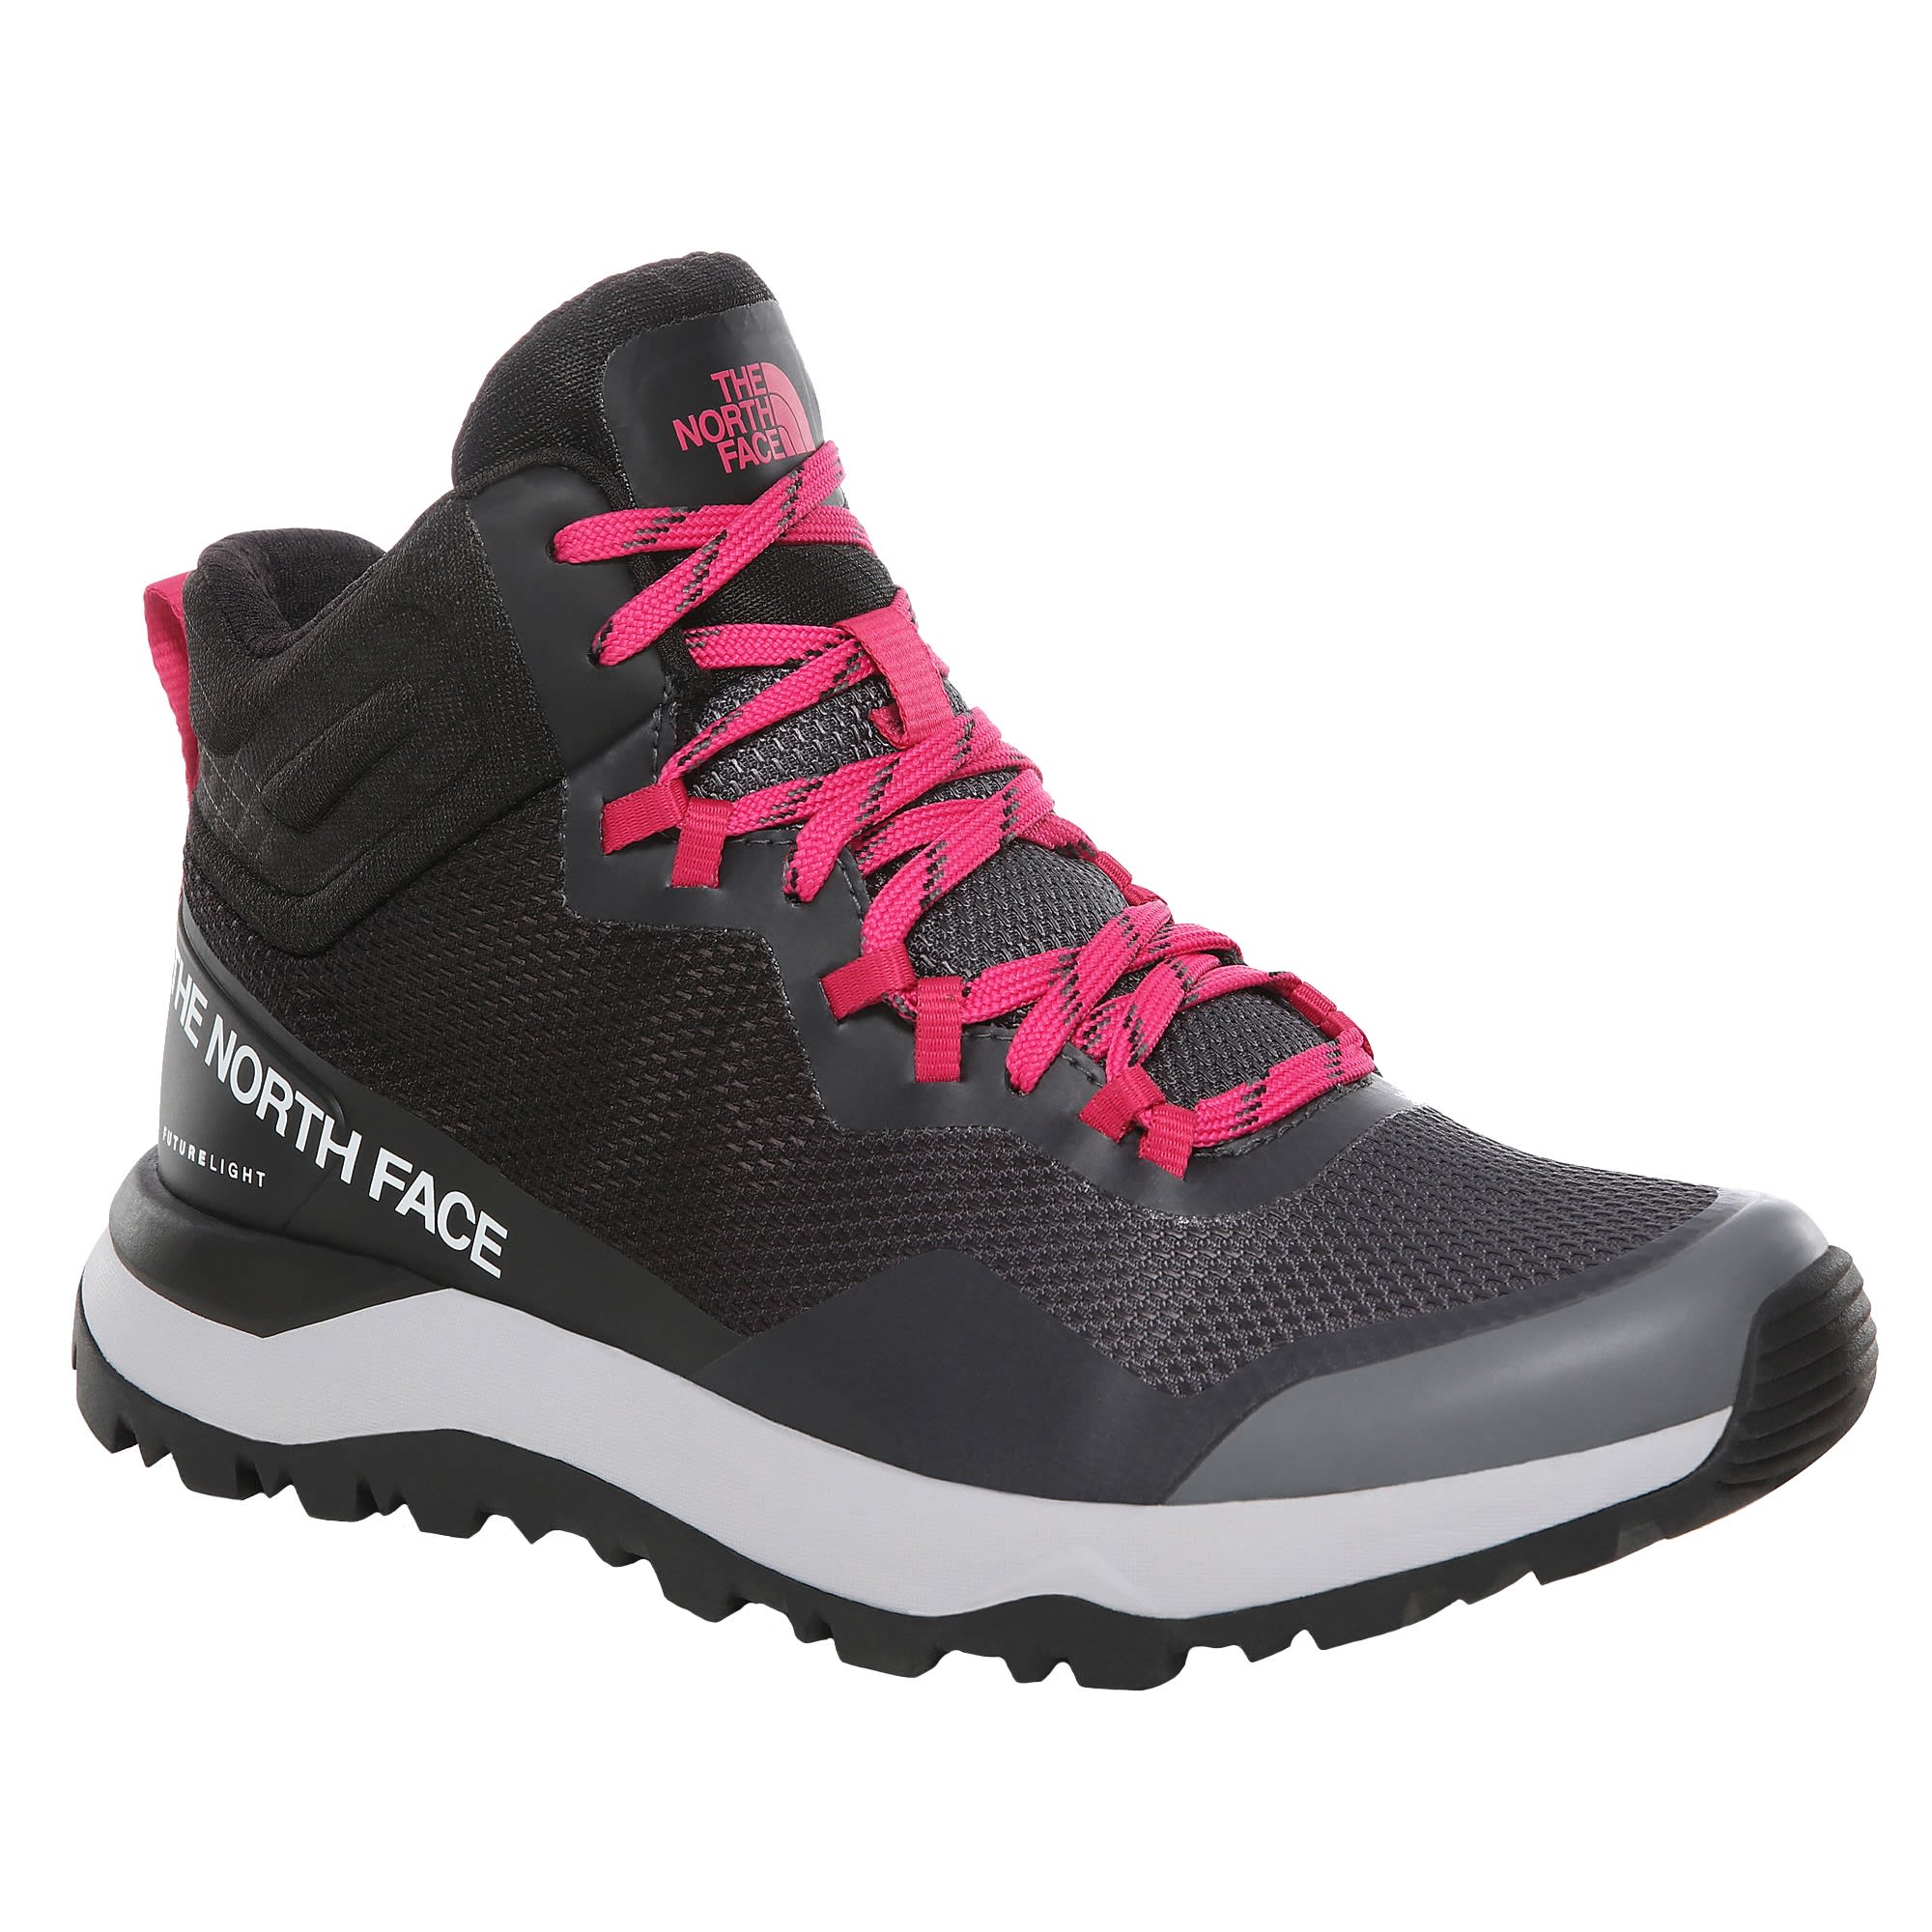 Buy The North Face Women's Activist FutureLight Mid from Outnorth